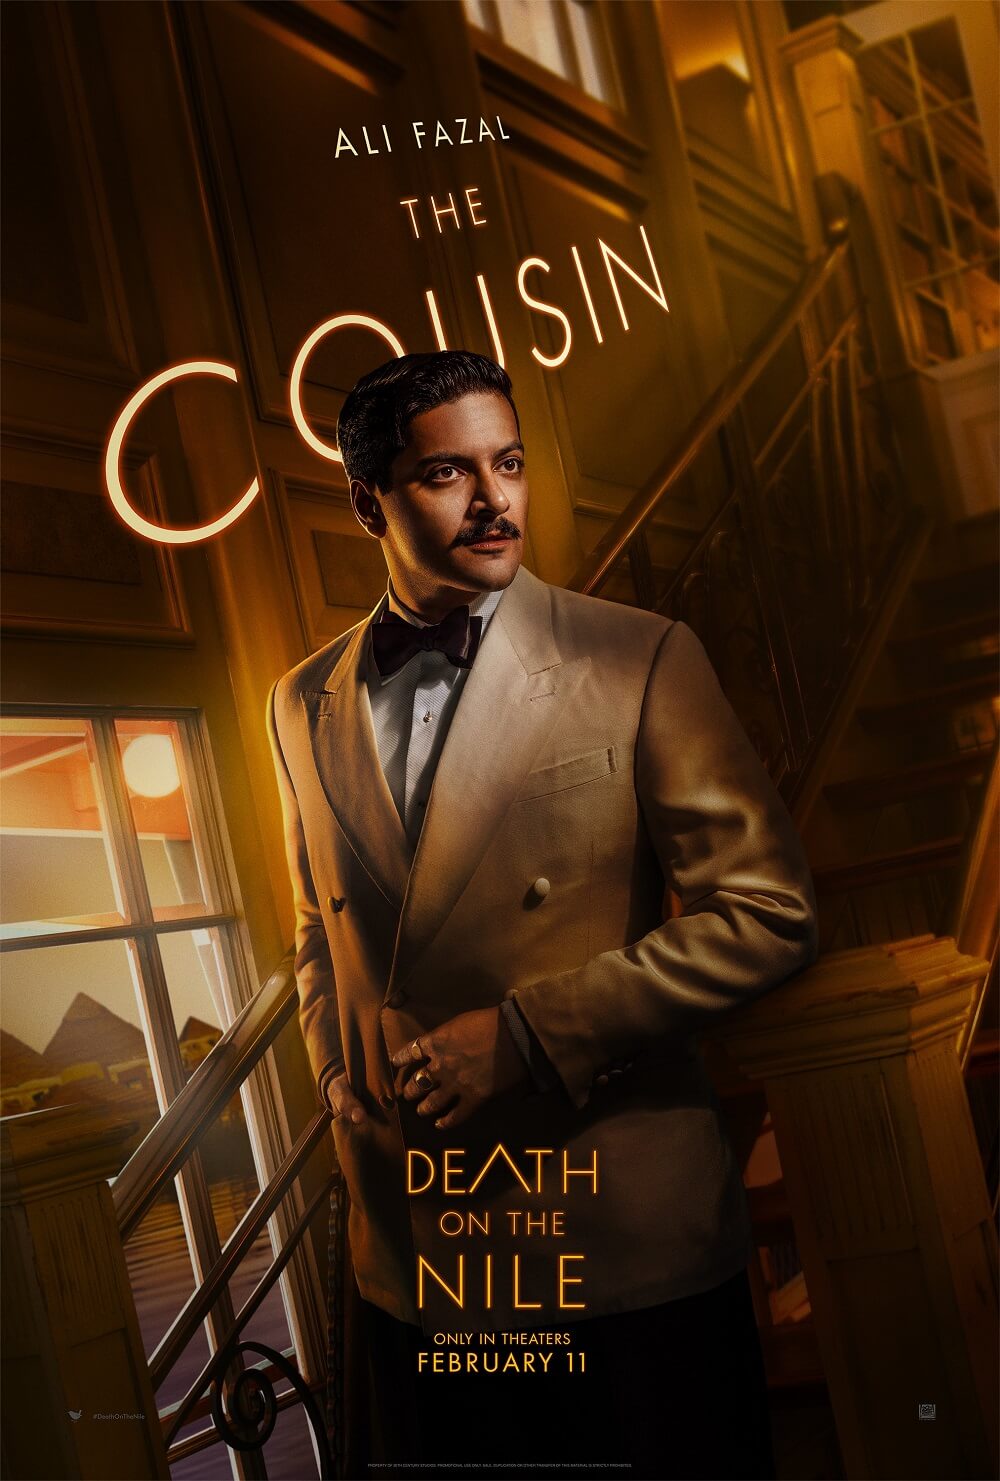 Death on the Nile released character posters passengers prepare to board the ship-4